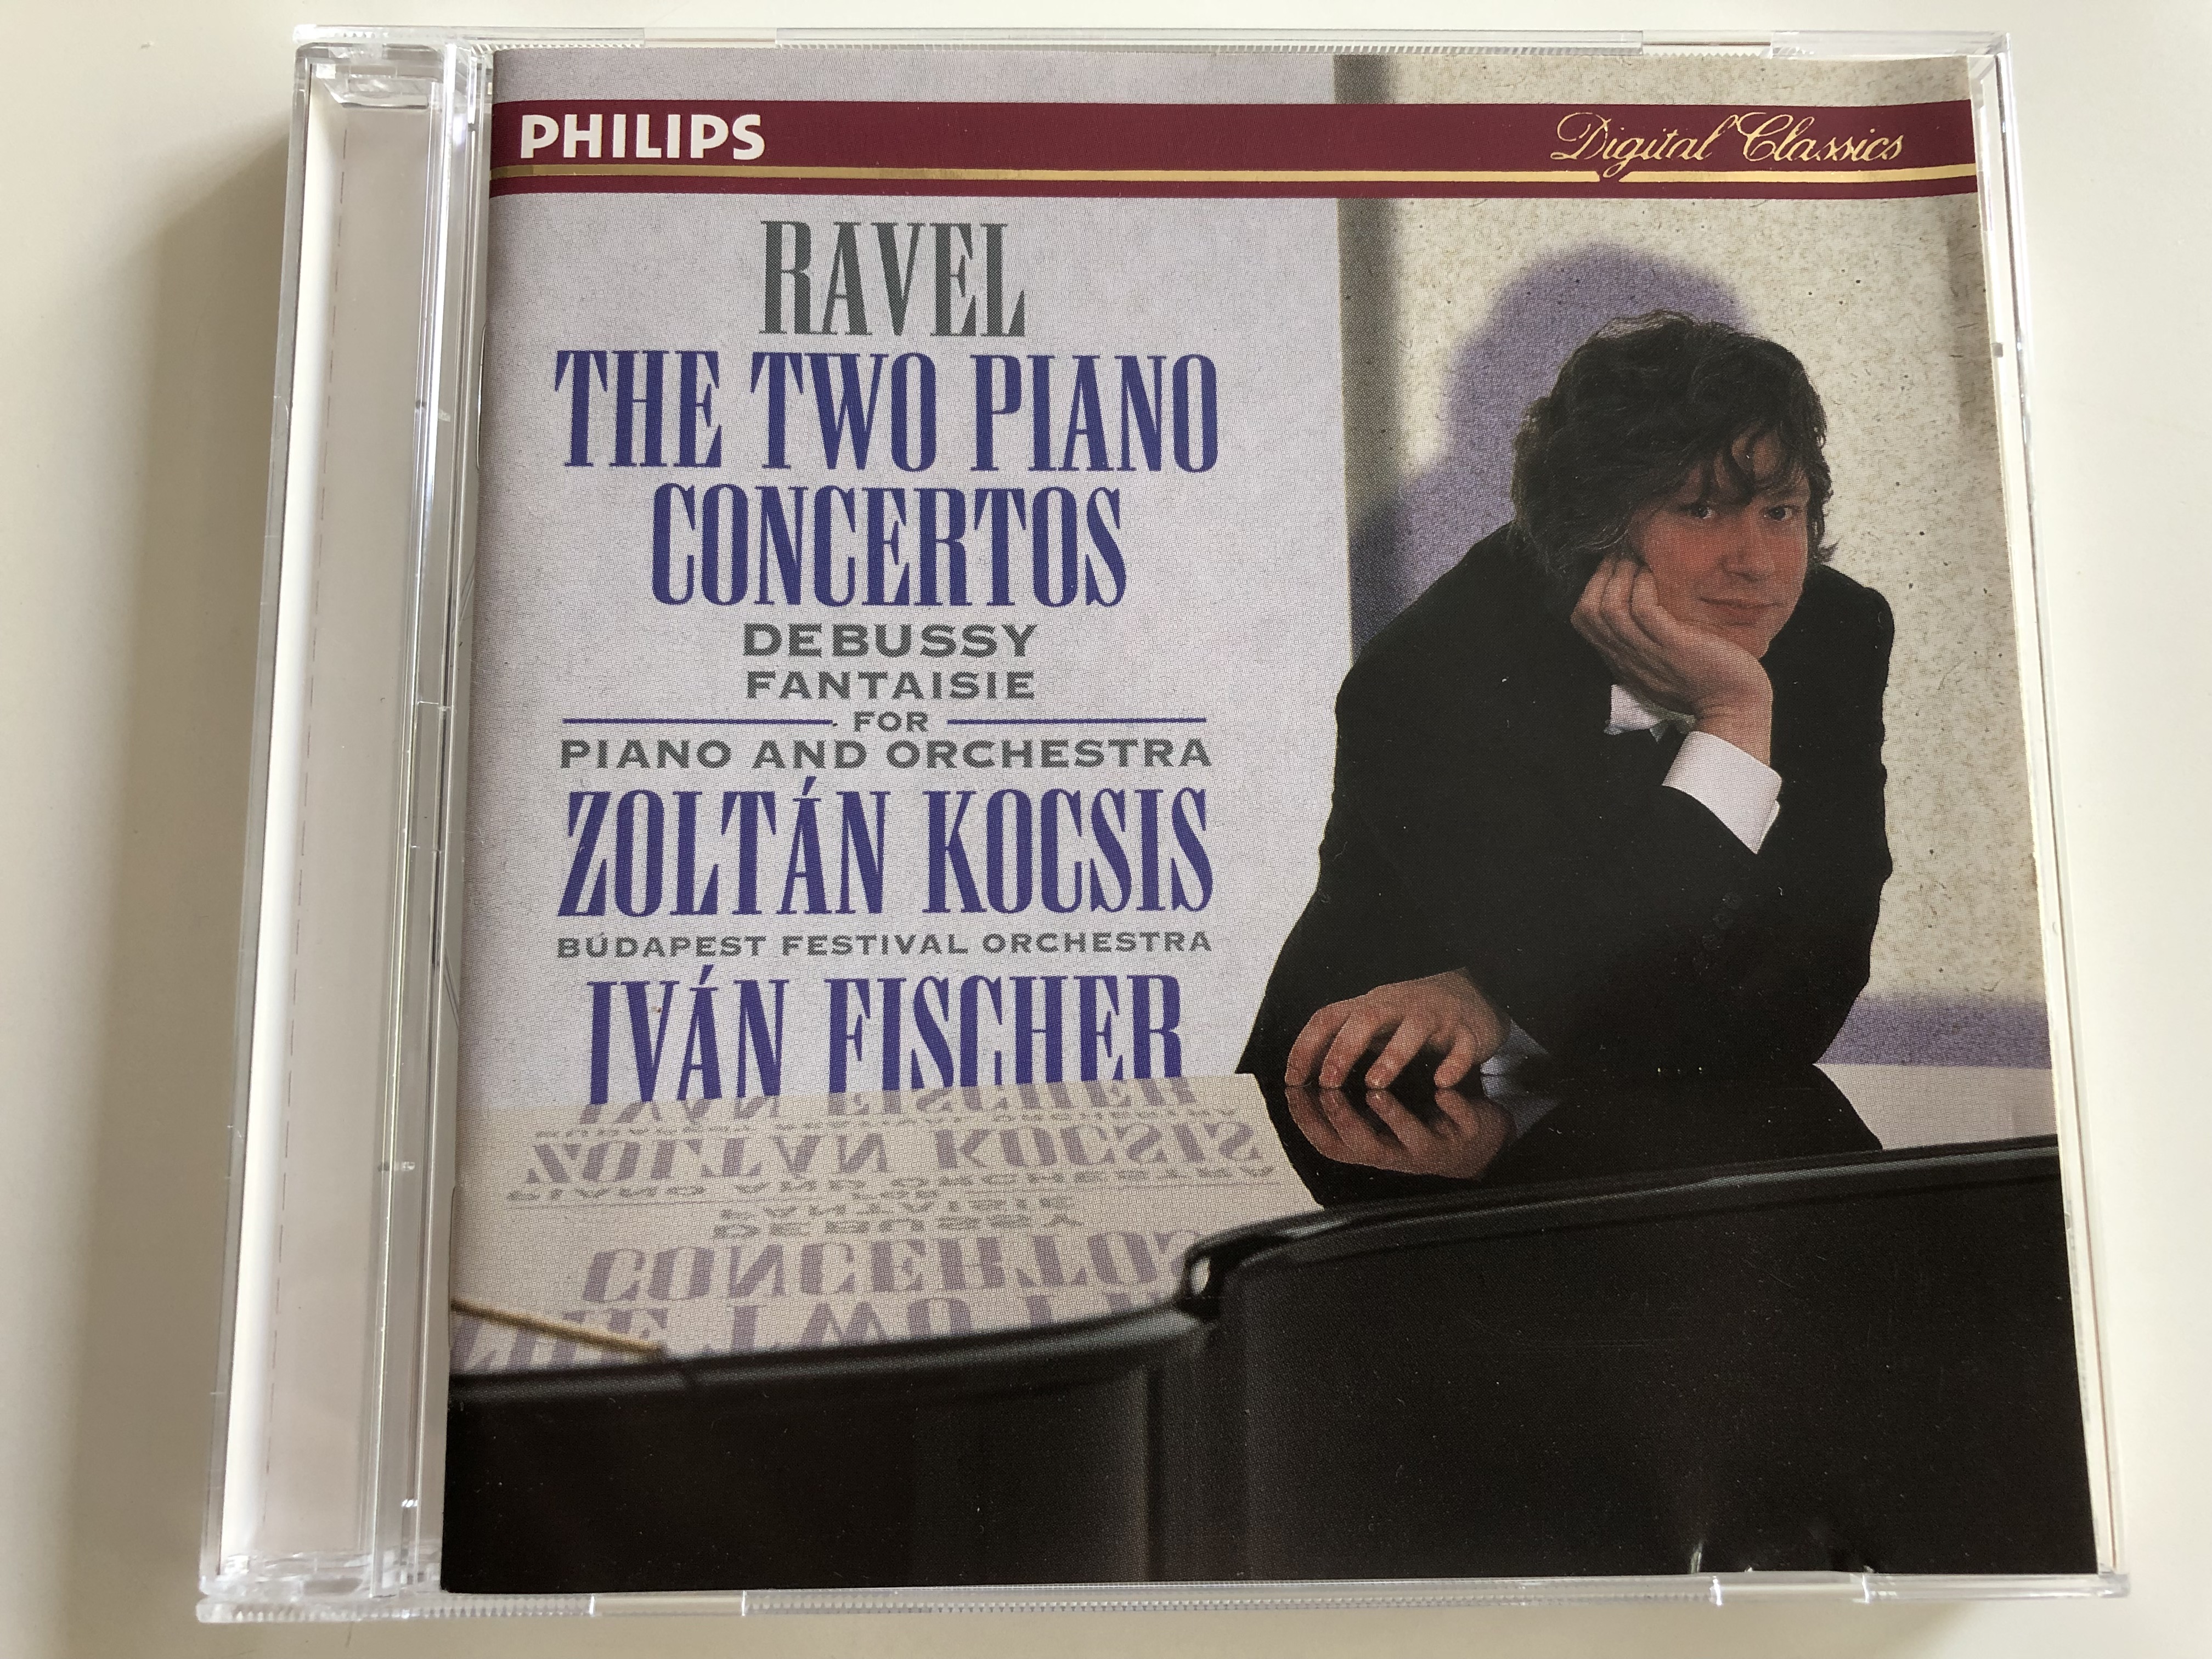 ravel-the-two-piano-concertos-debussy-fantasie-for-piano-and-orchestra-zolt-n-kocsis-piano-budapest-festival-orchestra-conducted-by-iv-n-fischer-philips-digital-classics-audio-cd-1996-446-713-2-1-.jpg